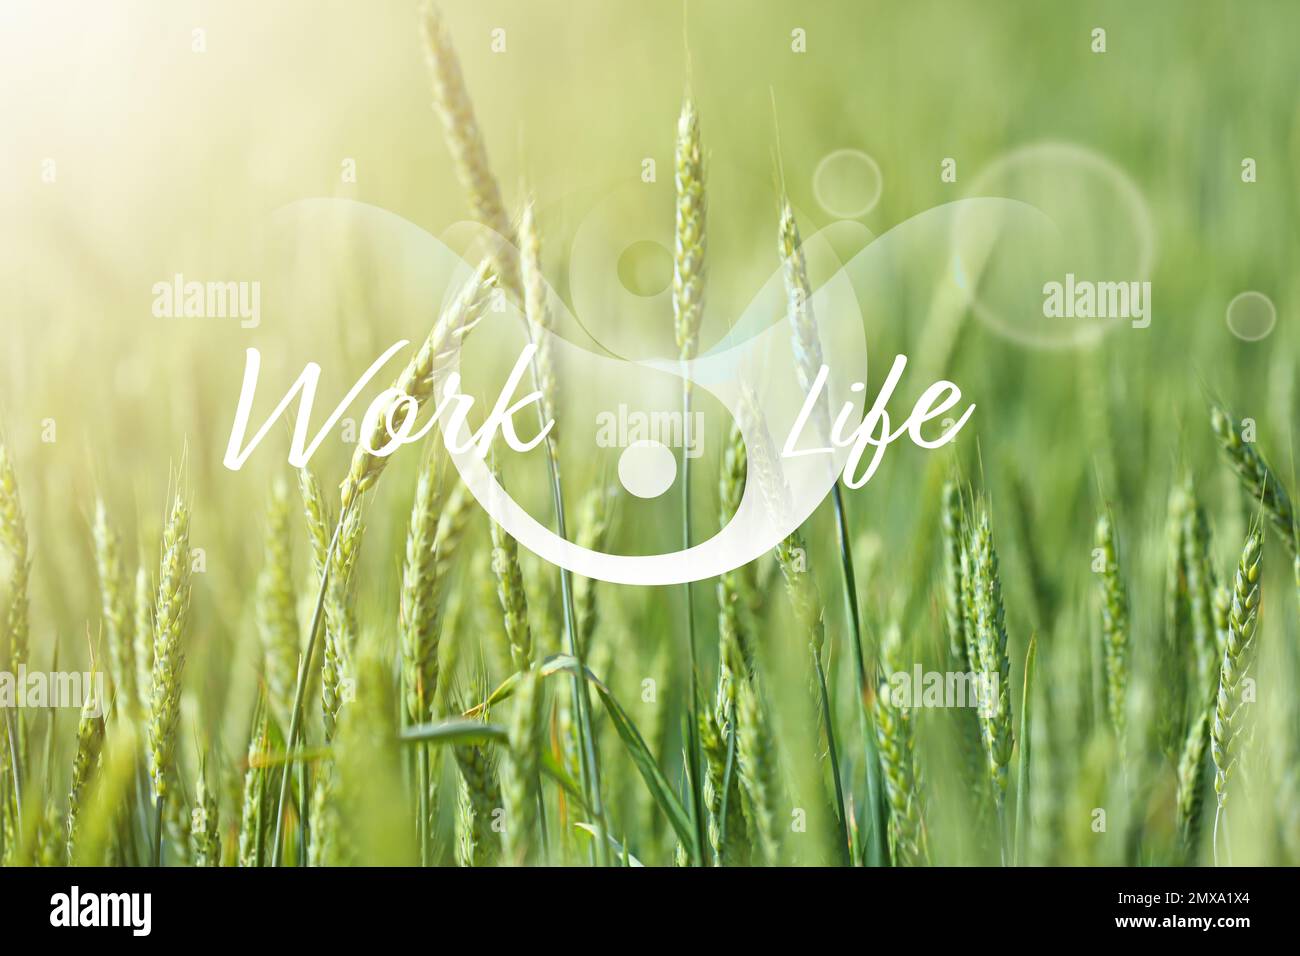 Wheat field on sunny day. Concept of balance between work and life Stock Photo